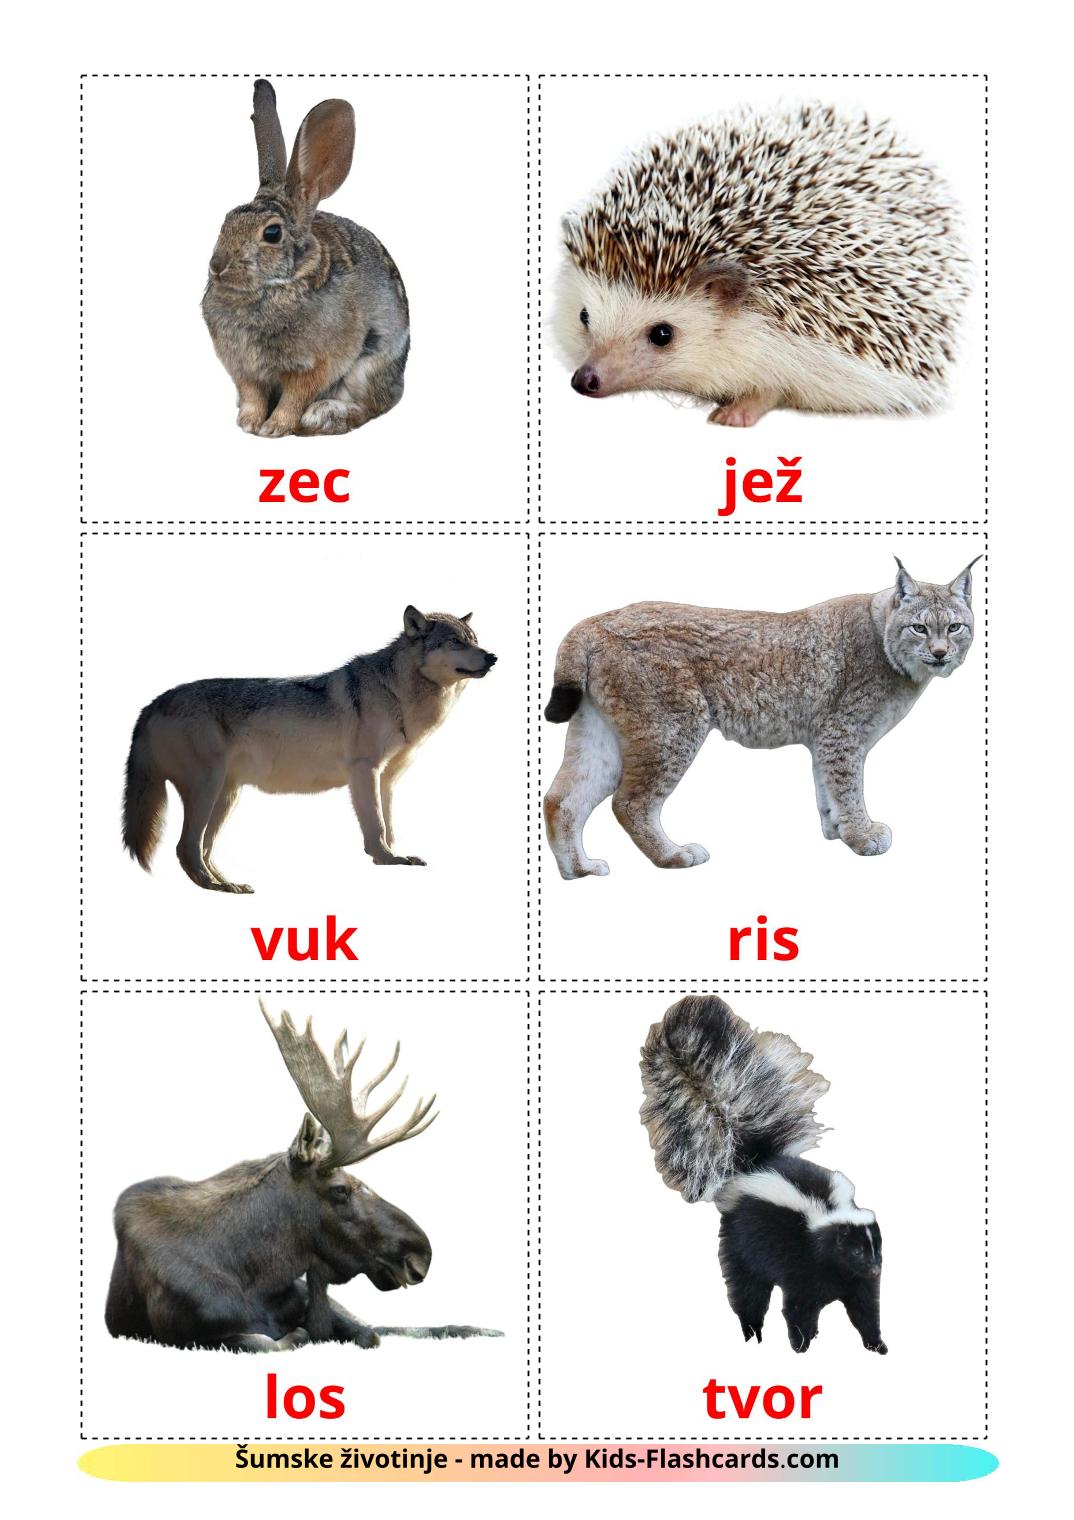 Forest animals - 22 Free Printable serbian Flashcards 